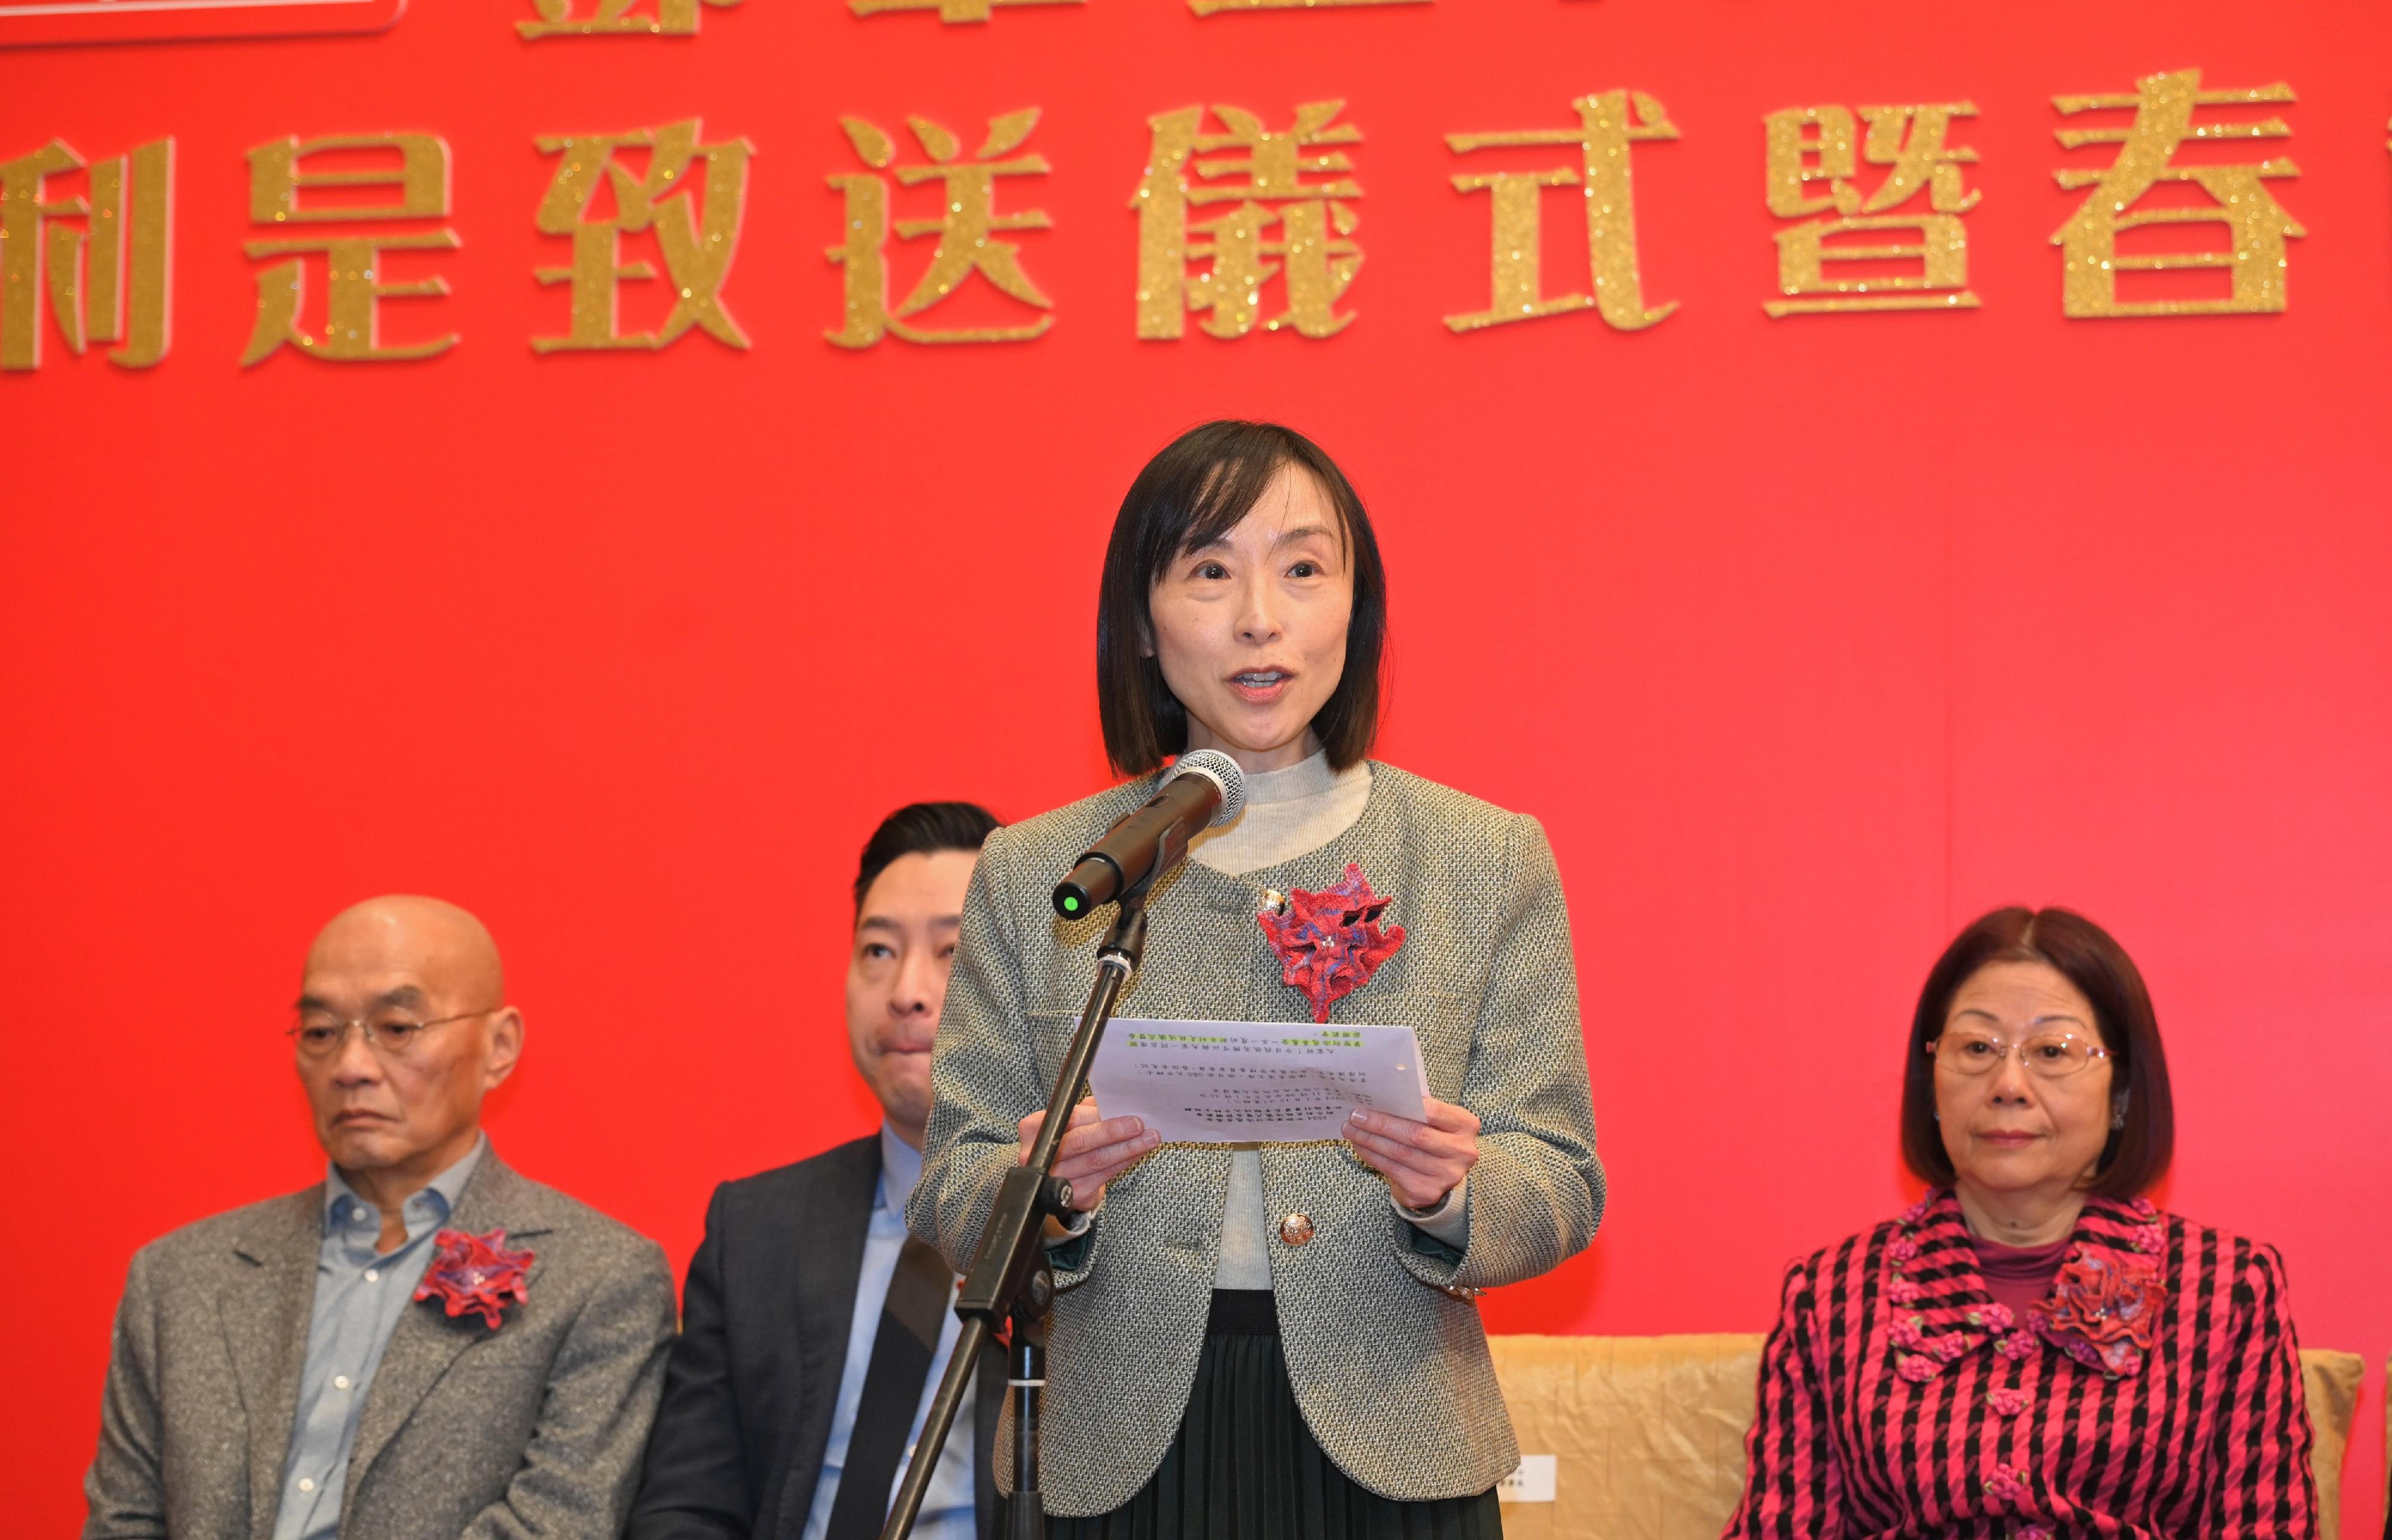 The Social Welfare Department and the Management Committee of the Tang Shiu Kin and Ho Tim Charitable Fund today (January 16) hosted a spring reception for the elderly and presented lai see packets to them in celebration of the upcoming Lunar New Year. Photo shows the Director of Social Welfare, Miss Charmaine Lee, speaking at the spring reception and wishing all participating elderly a healthy and happy new year.